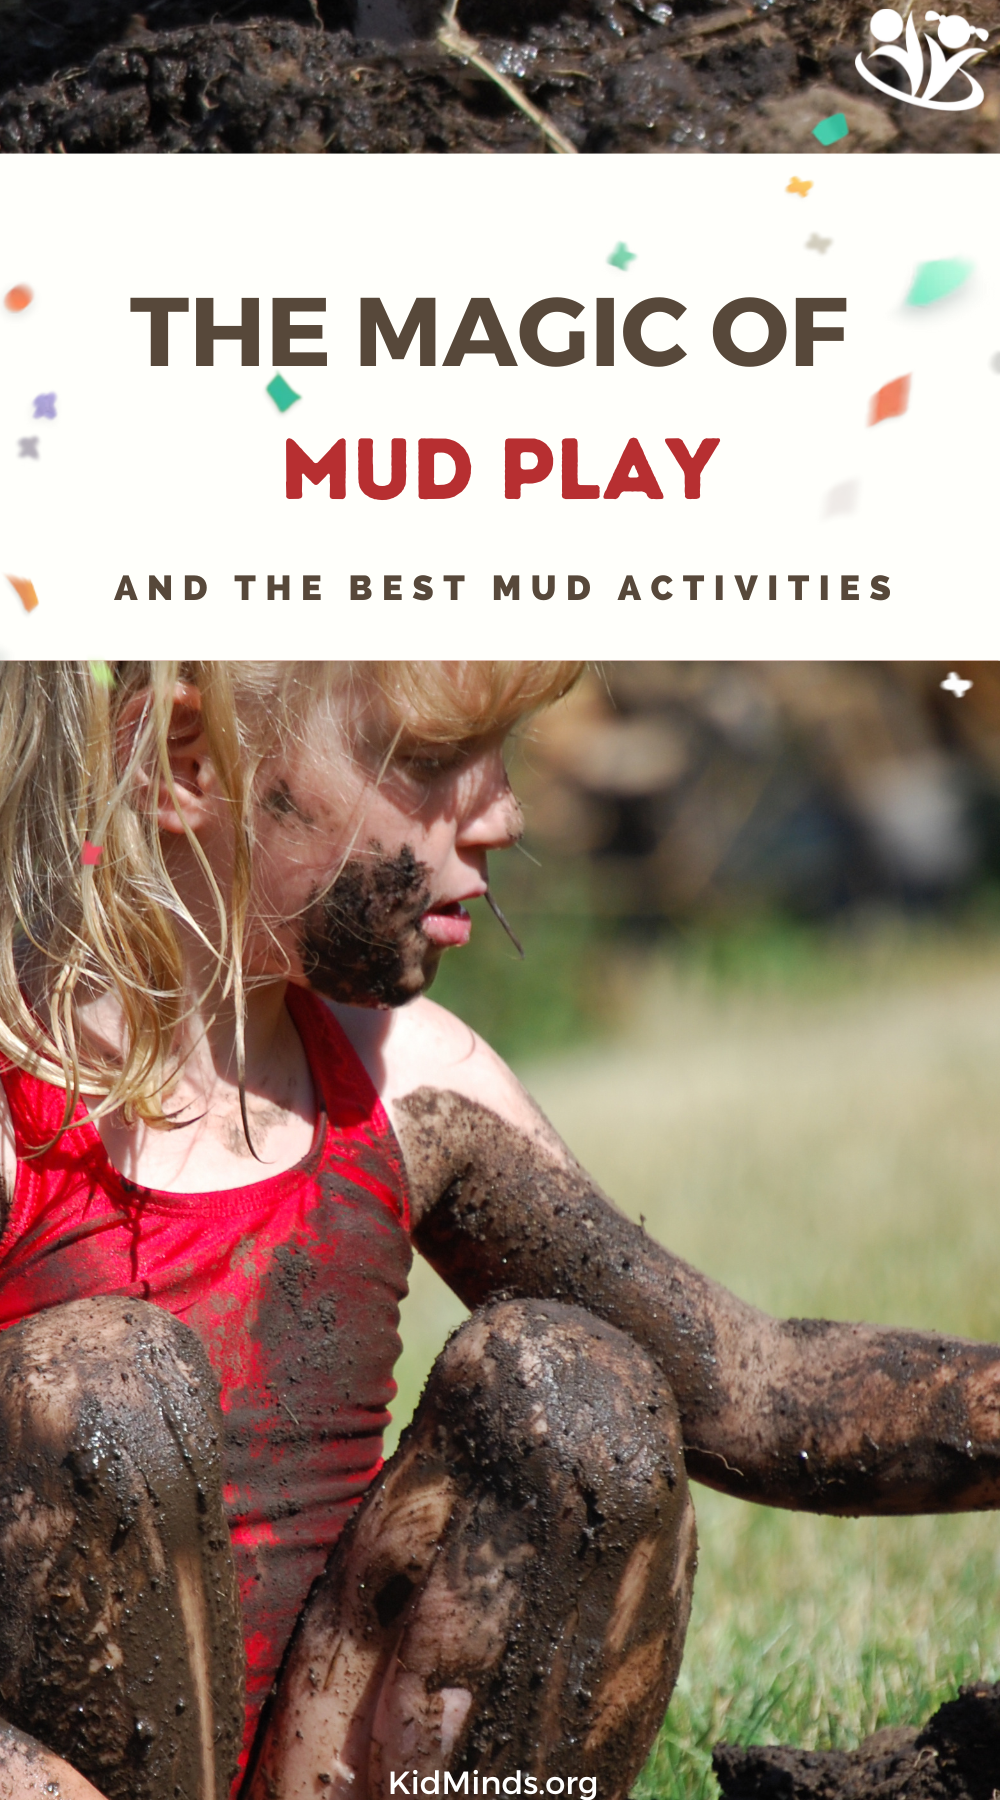 Mud play fosters your child’s creativity, happiness, and health. Read on to find out the benefits of mud play + best mud play activities. #mudplay #outdoorplay #learning #messyplay #naturalchildhood #natureplay #puddlejumper #wildchild #outsideplay #playandlearn